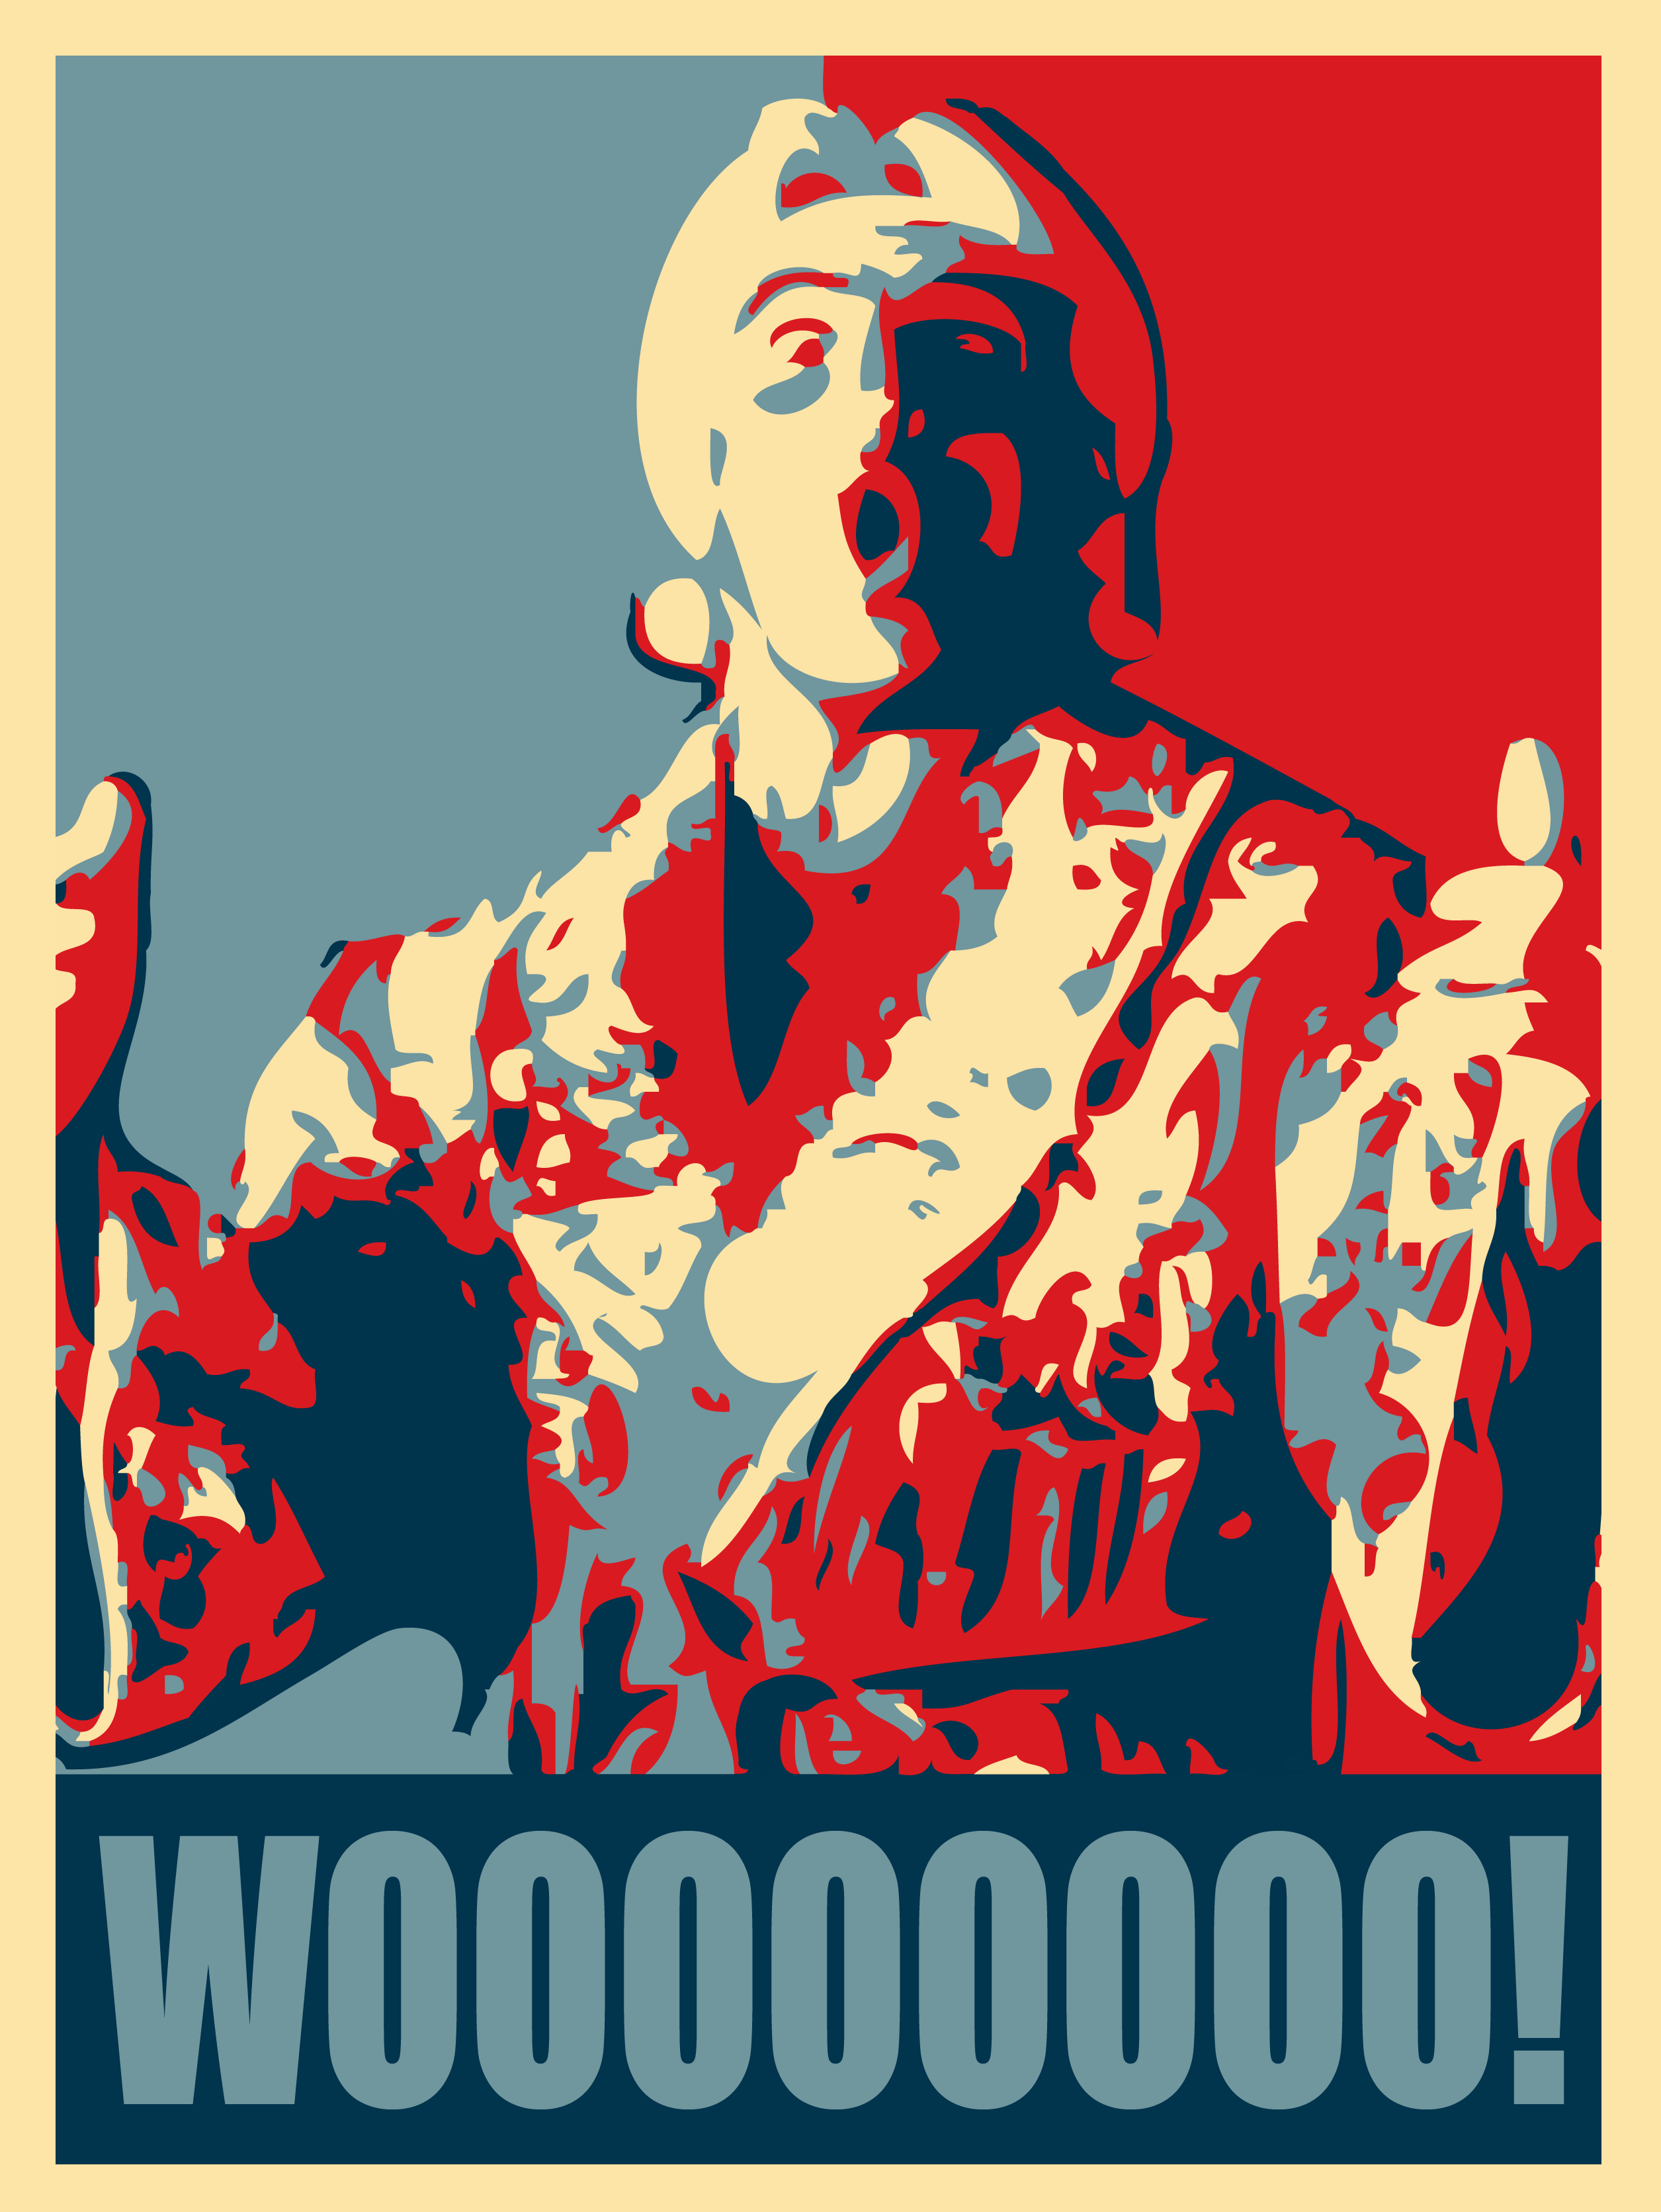 Ric_Flair_For_Prez_____by_AngryDogDesigns.png